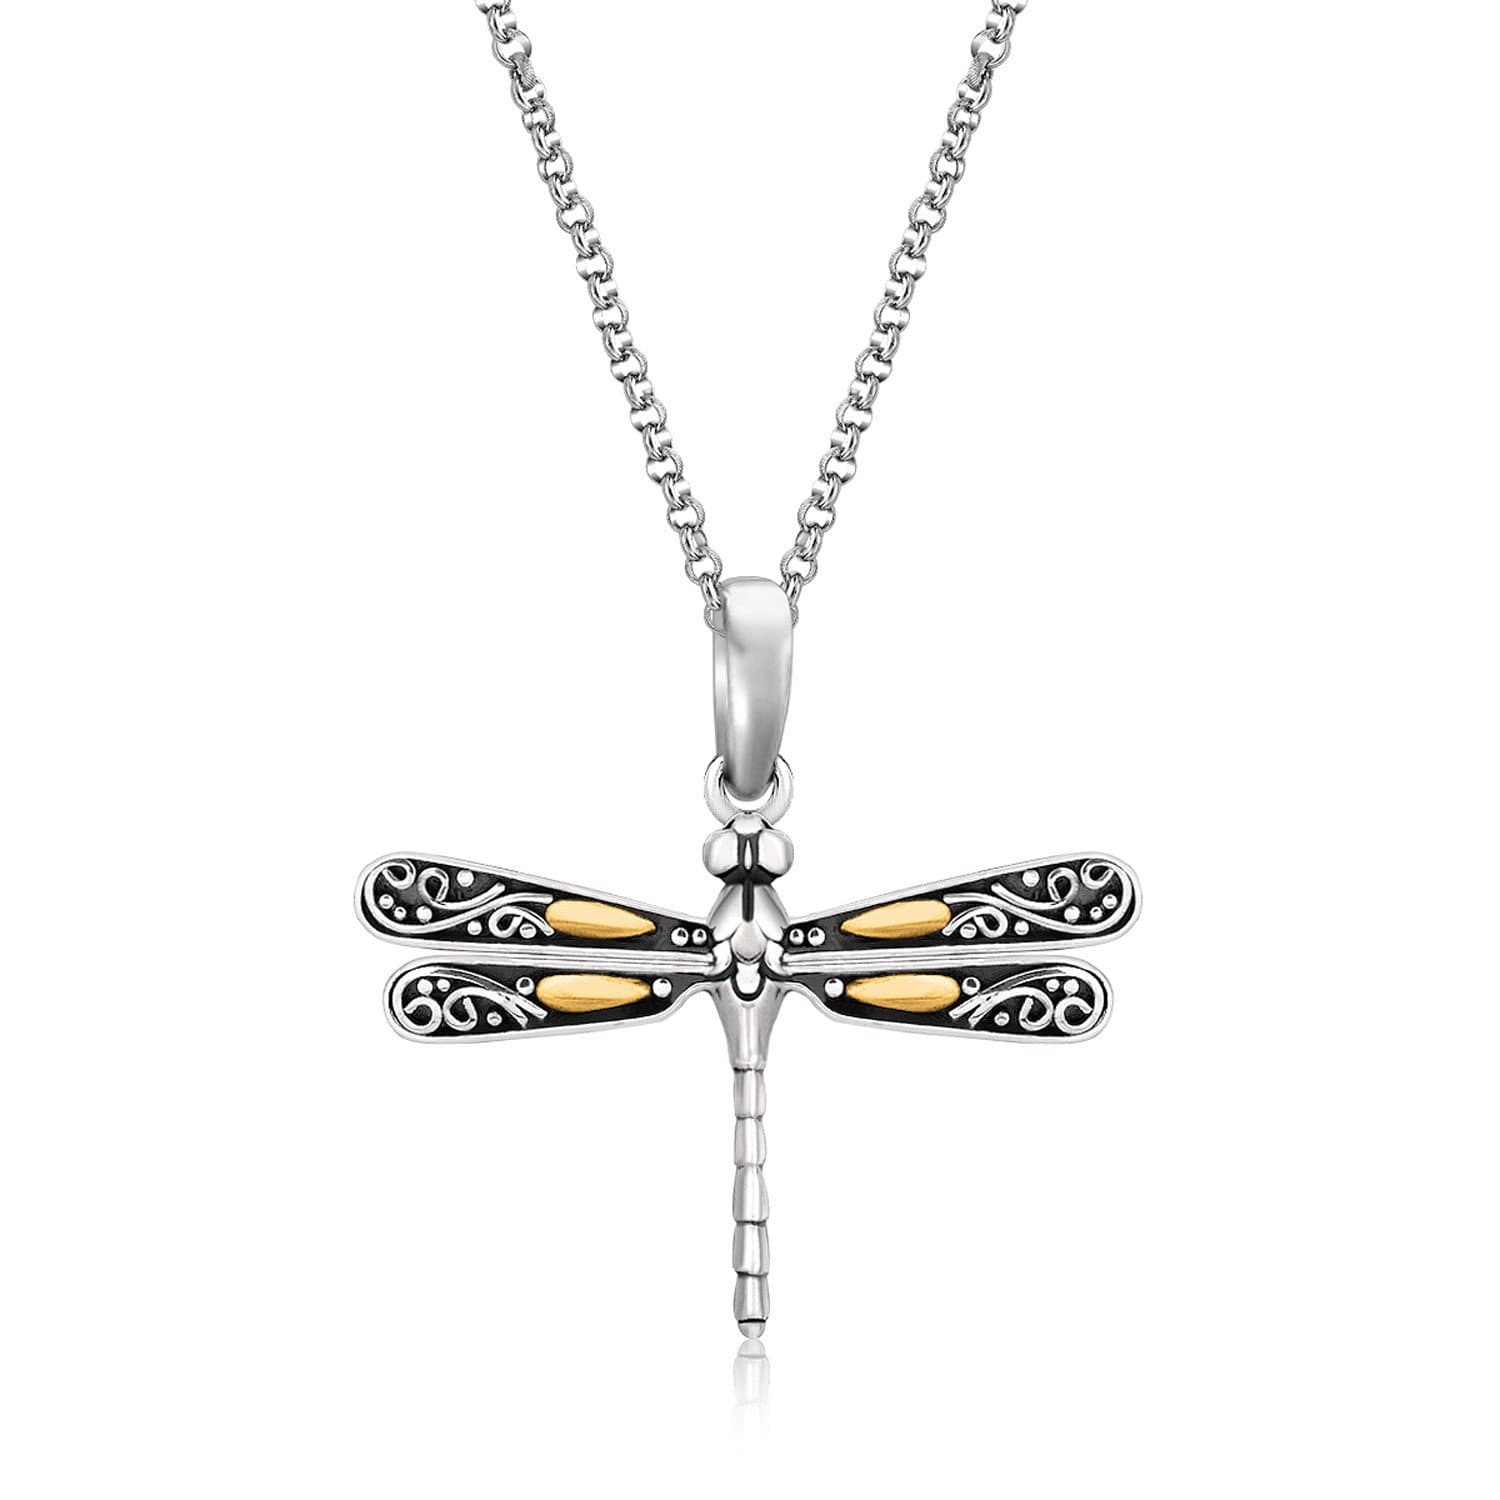 18K Yellow Gold and Sterling Silver Pendant in a Dragonfly Design